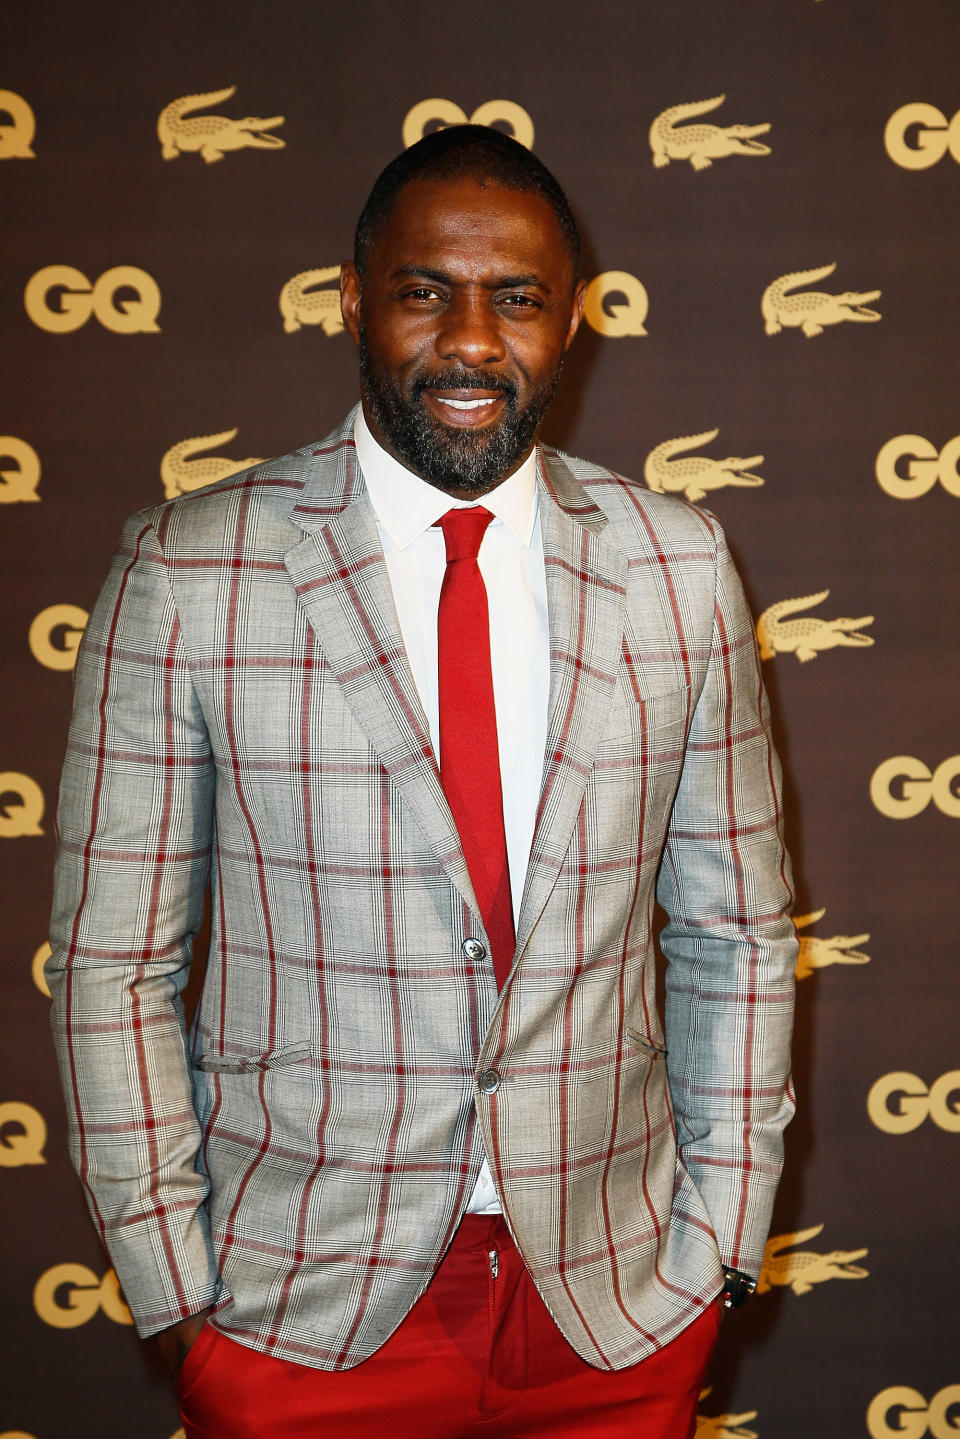 PARIS, FRANCE - JANUARY 16: Idris Elba attends GQ Men of the year awards 2012 at Musee d'Orsay on January 16, 2013 in Paris, France.  (Photo by Julien M. Hekimian/Getty Images)